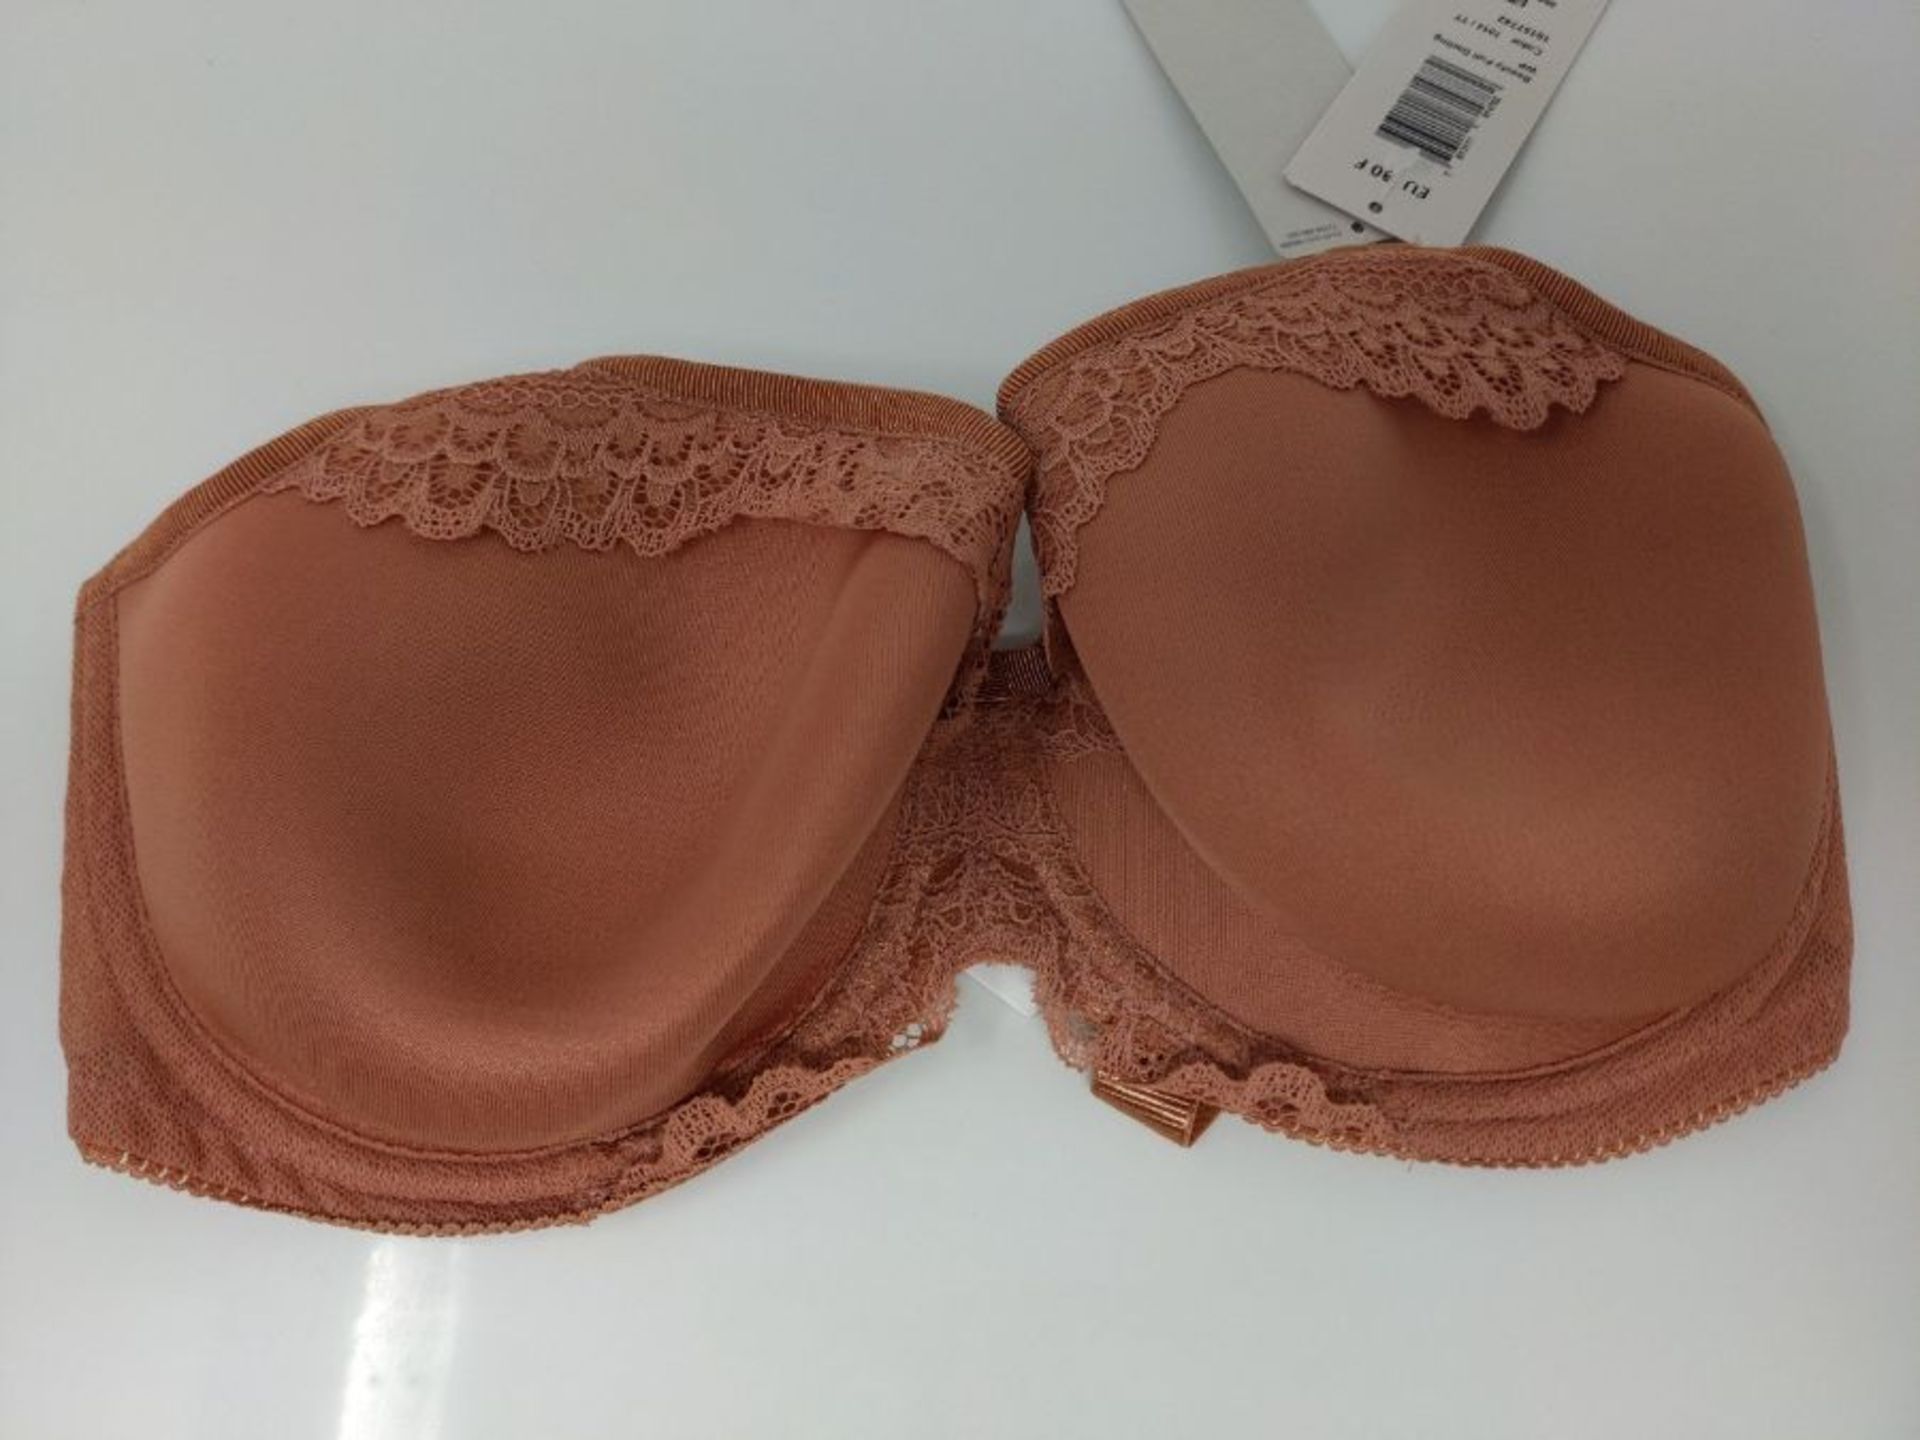 Triumph Women's Beauty-Full Darling Wp Coverage Bra, Red (Rust 7014), 36E - Image 2 of 2